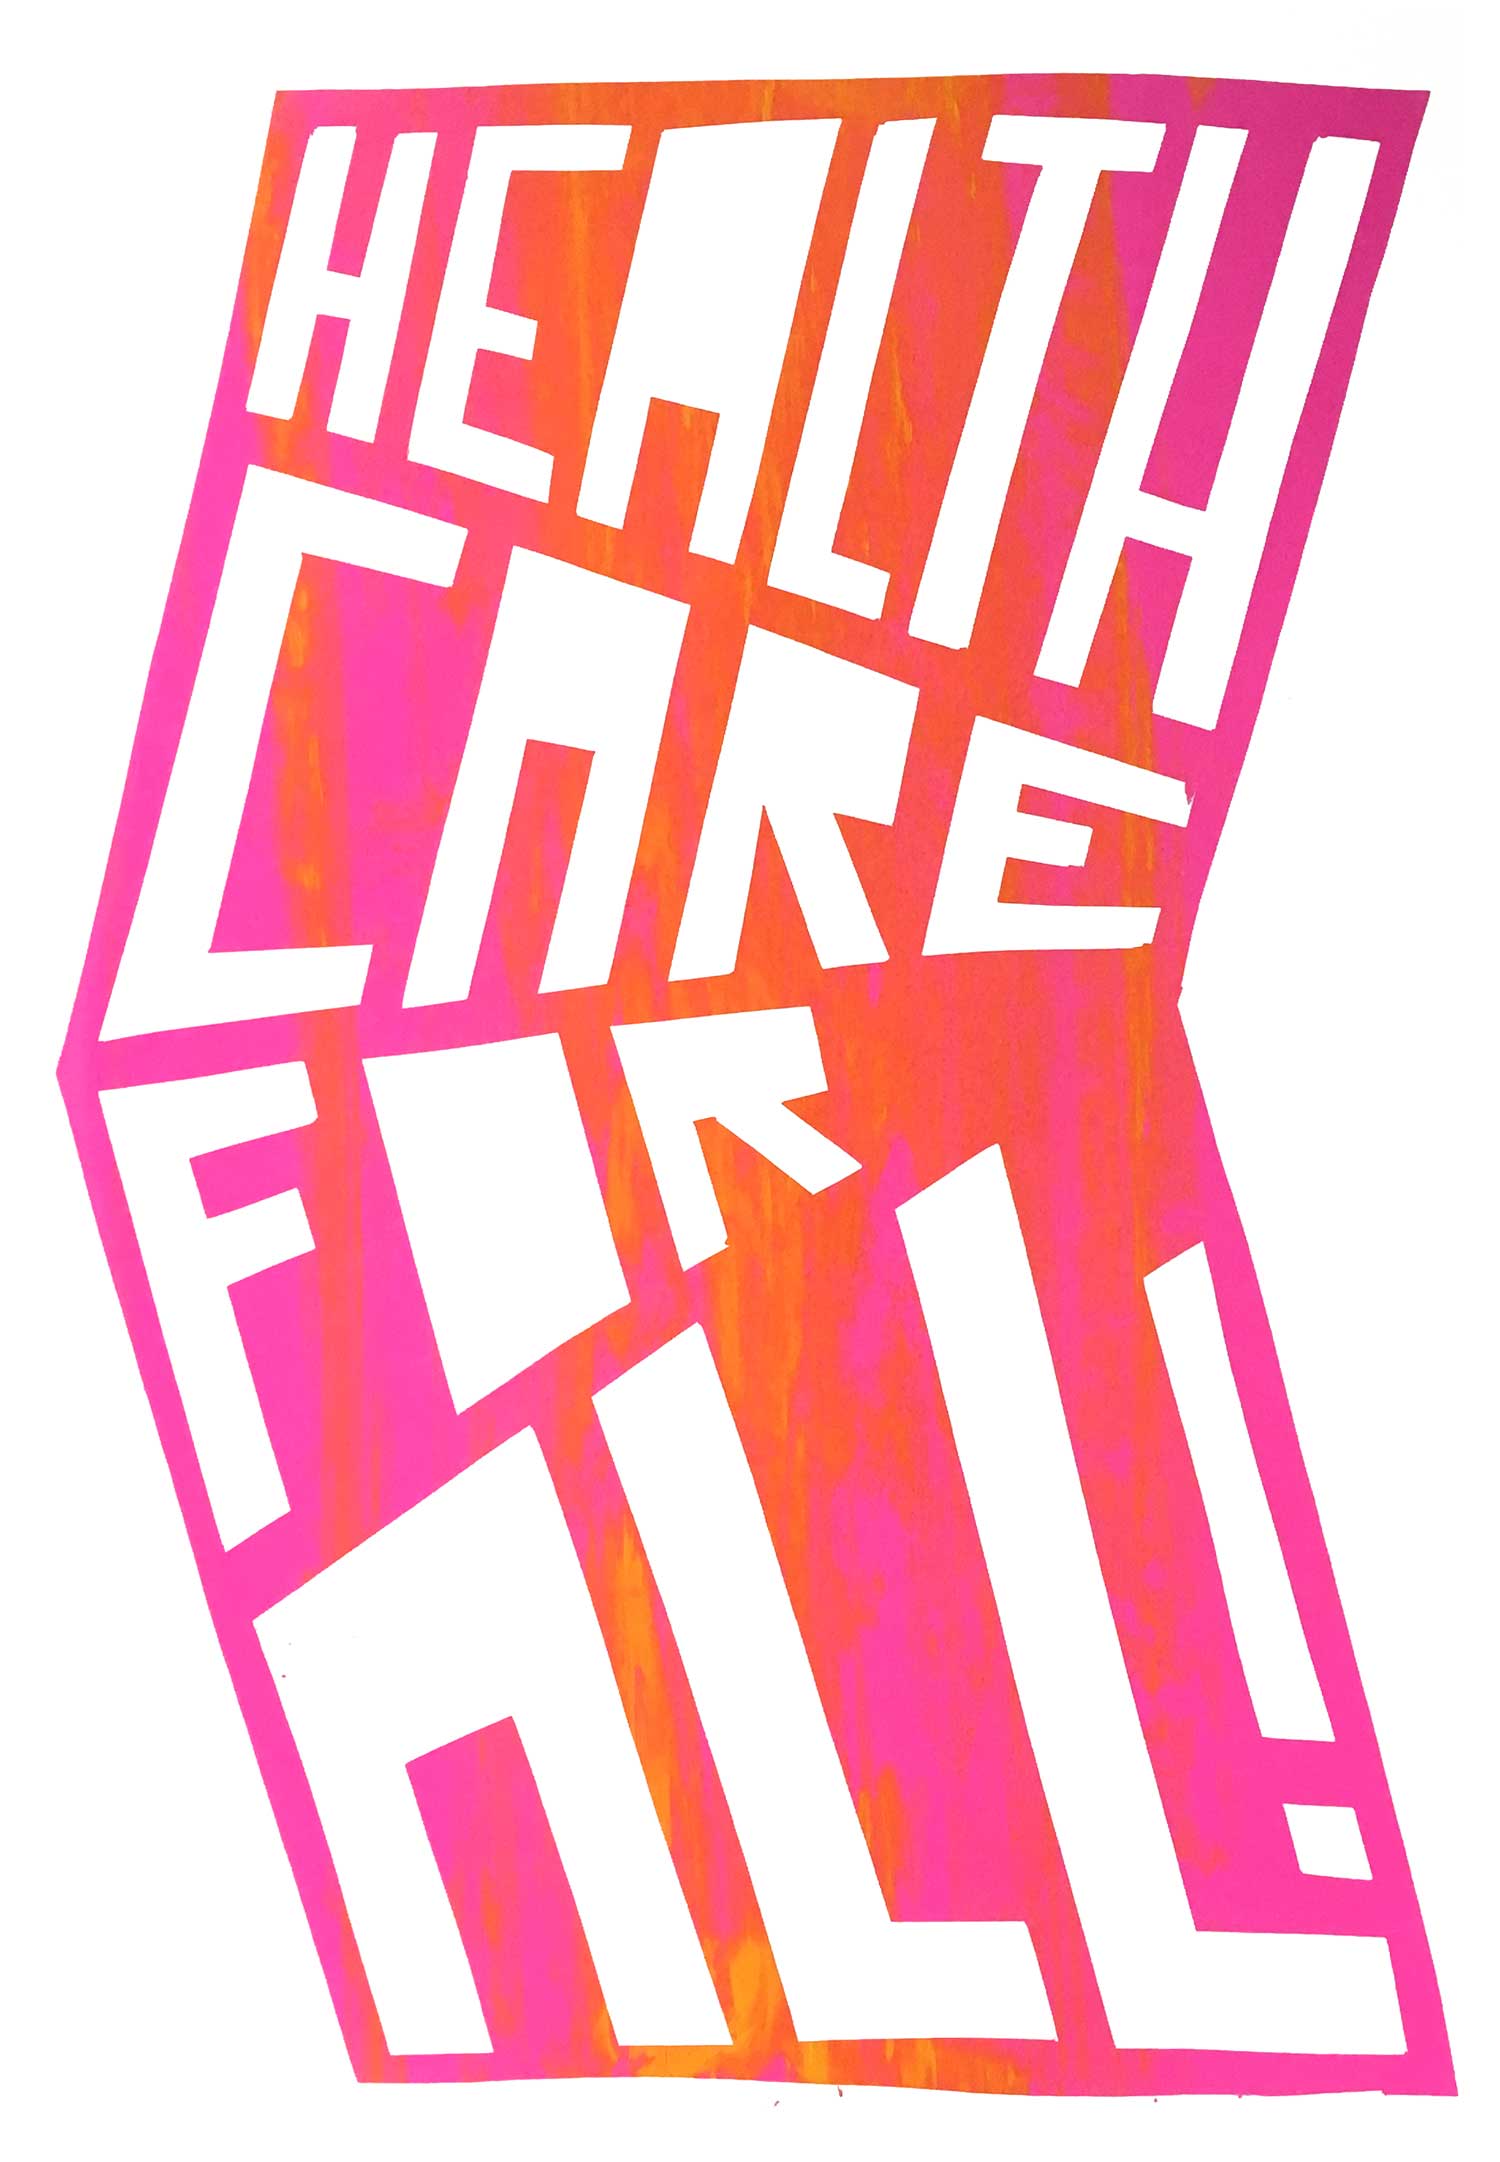 The slogan “Health Care For All!” against a pink and orange background